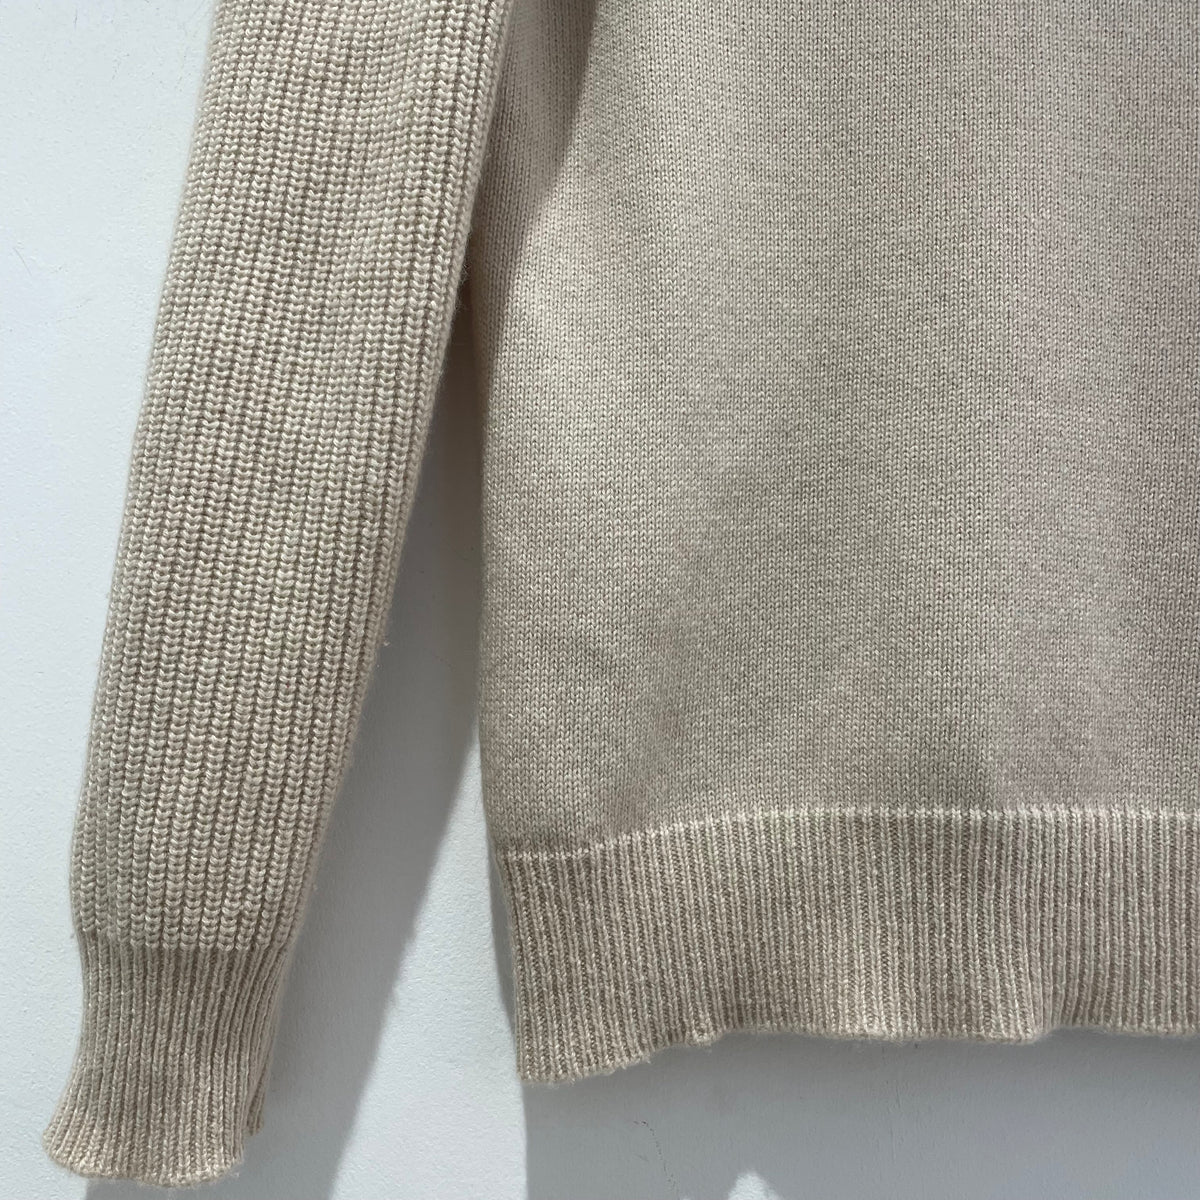 Chloe cashmere jumper Sand Size Small